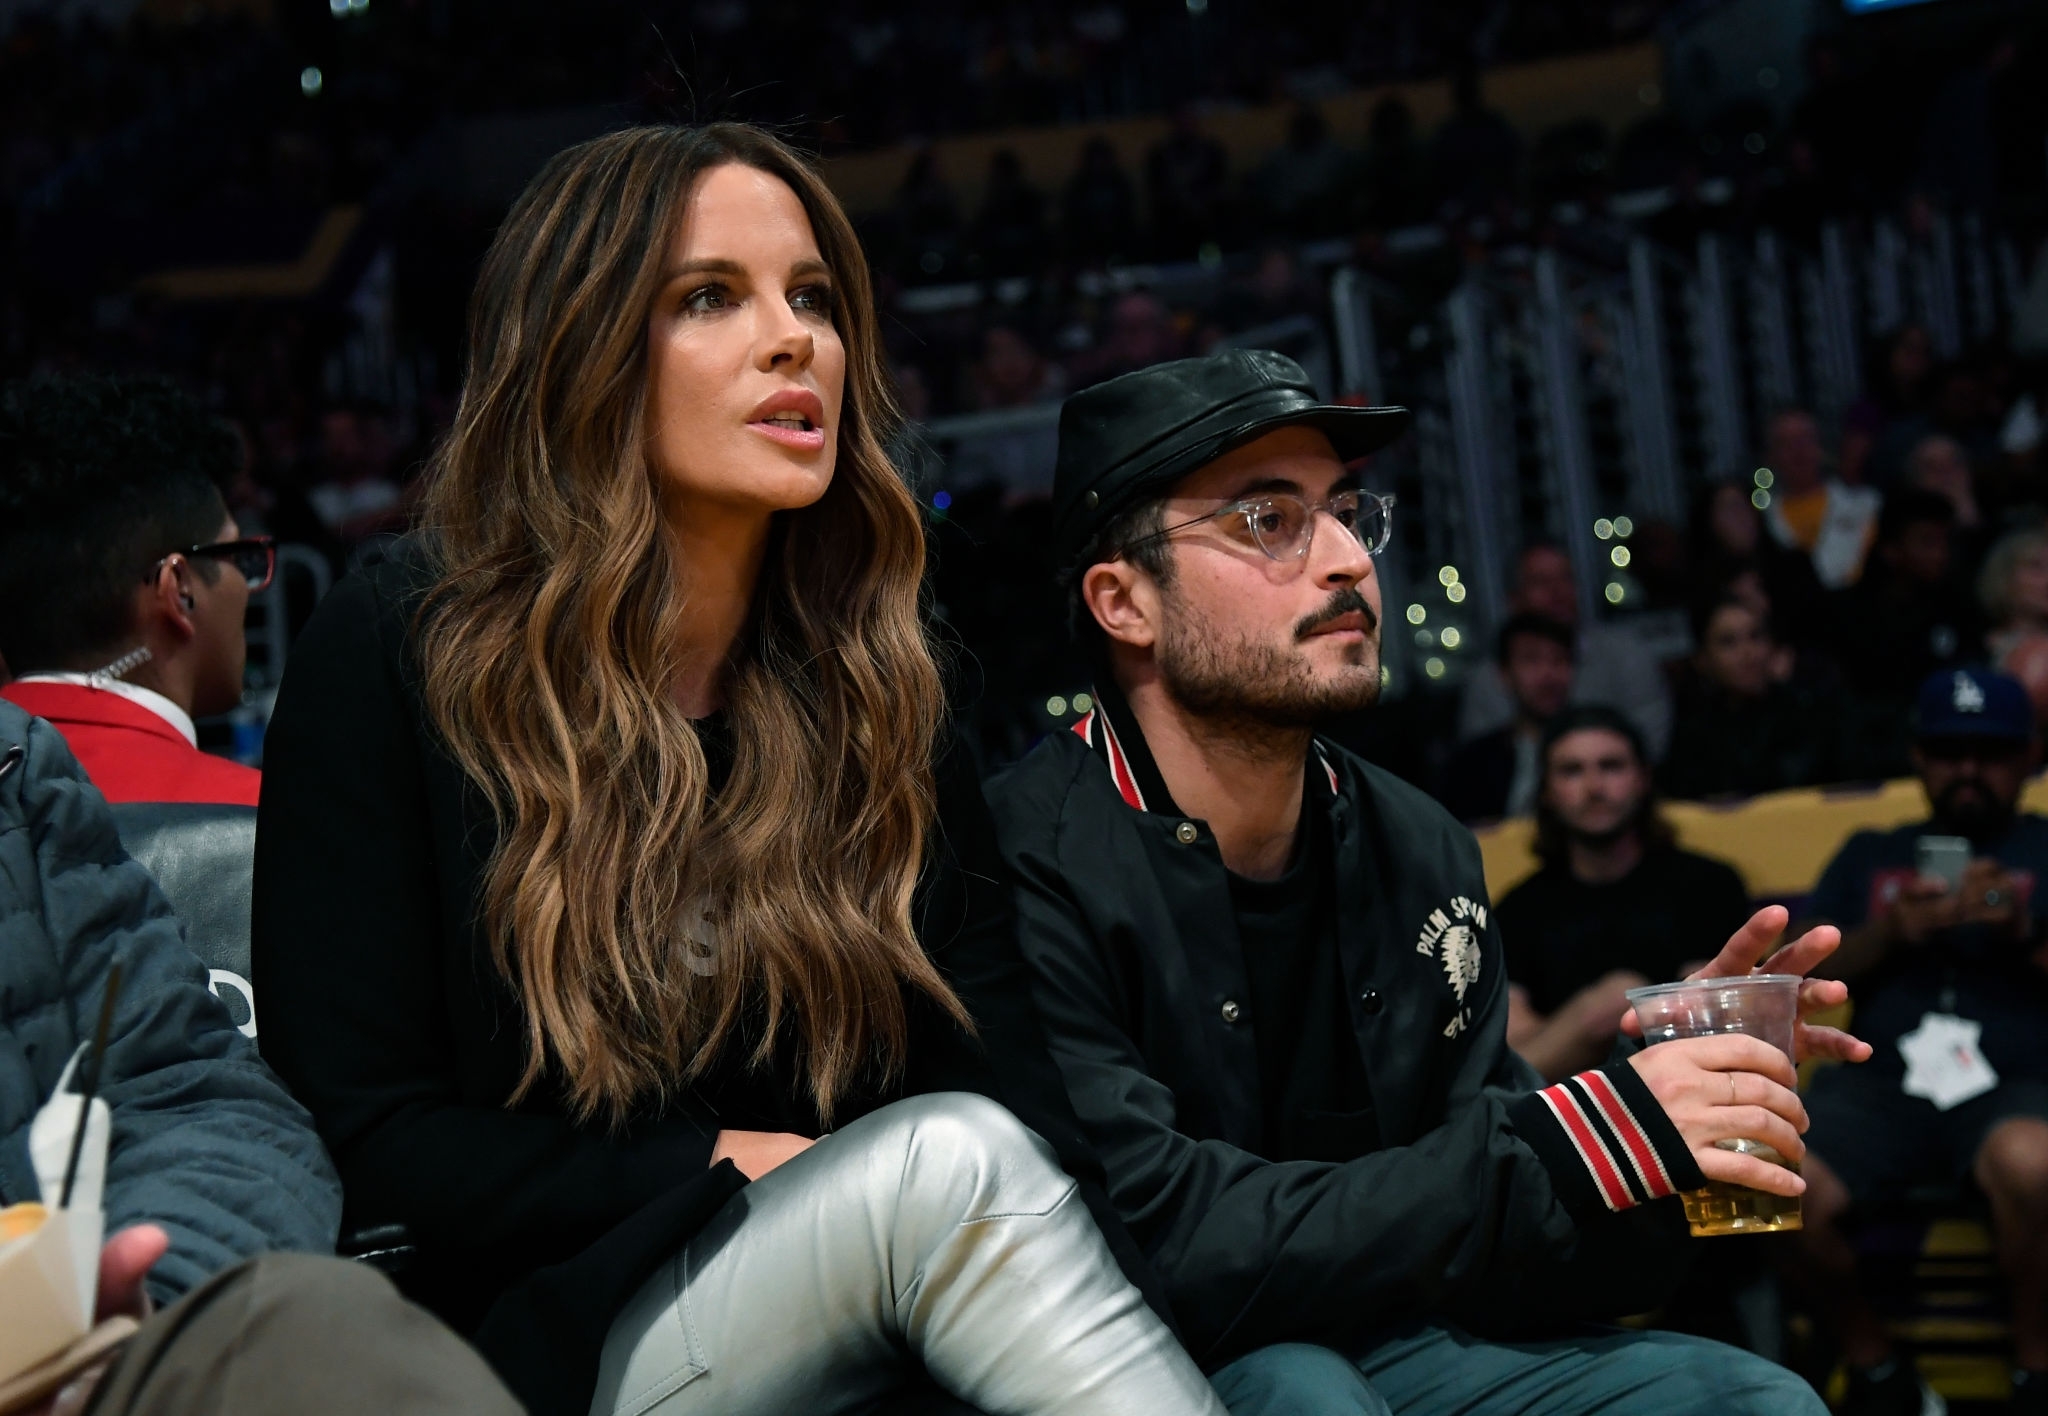 Kate Beckinsale attends Miami Heat vs Los Angeles Lakers